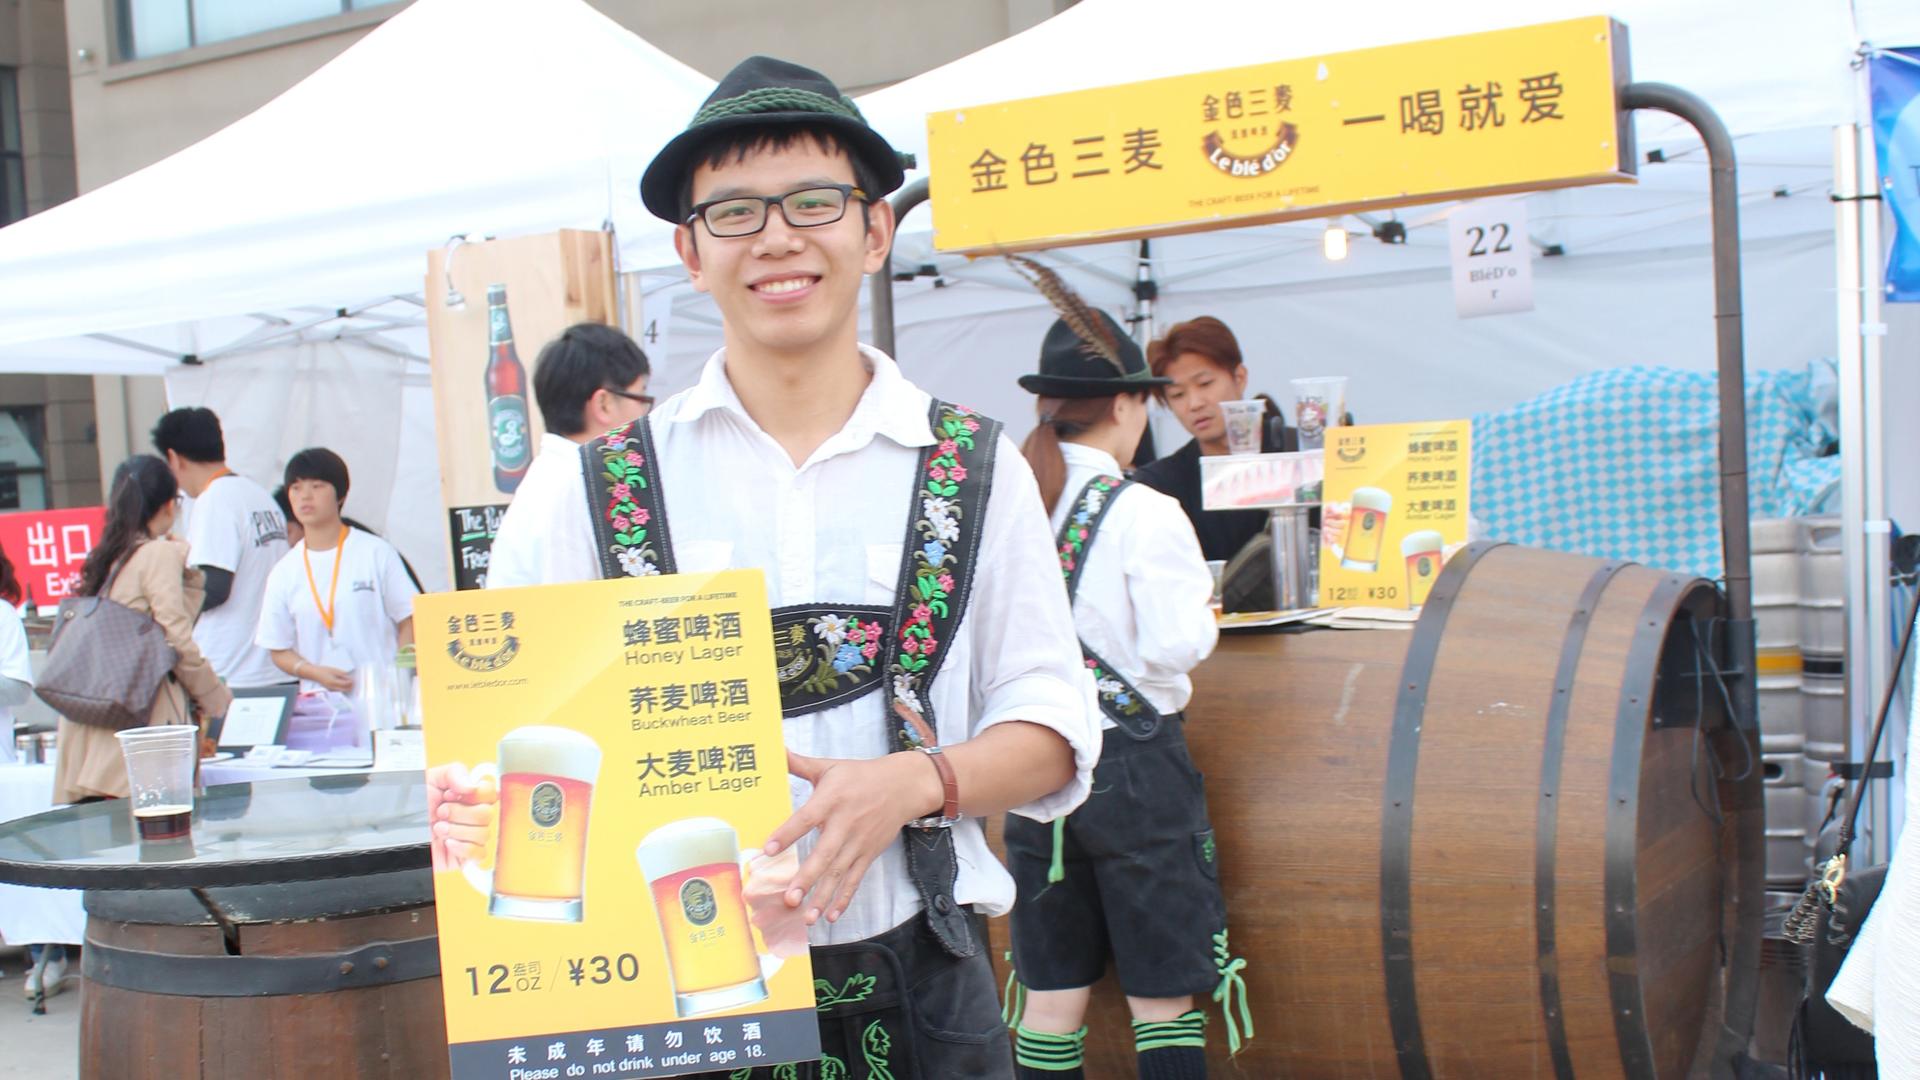 At the Shanghai Beer Fest, a waiter for a local brewer sports lederhosen. China is becoming more of an international beer market.